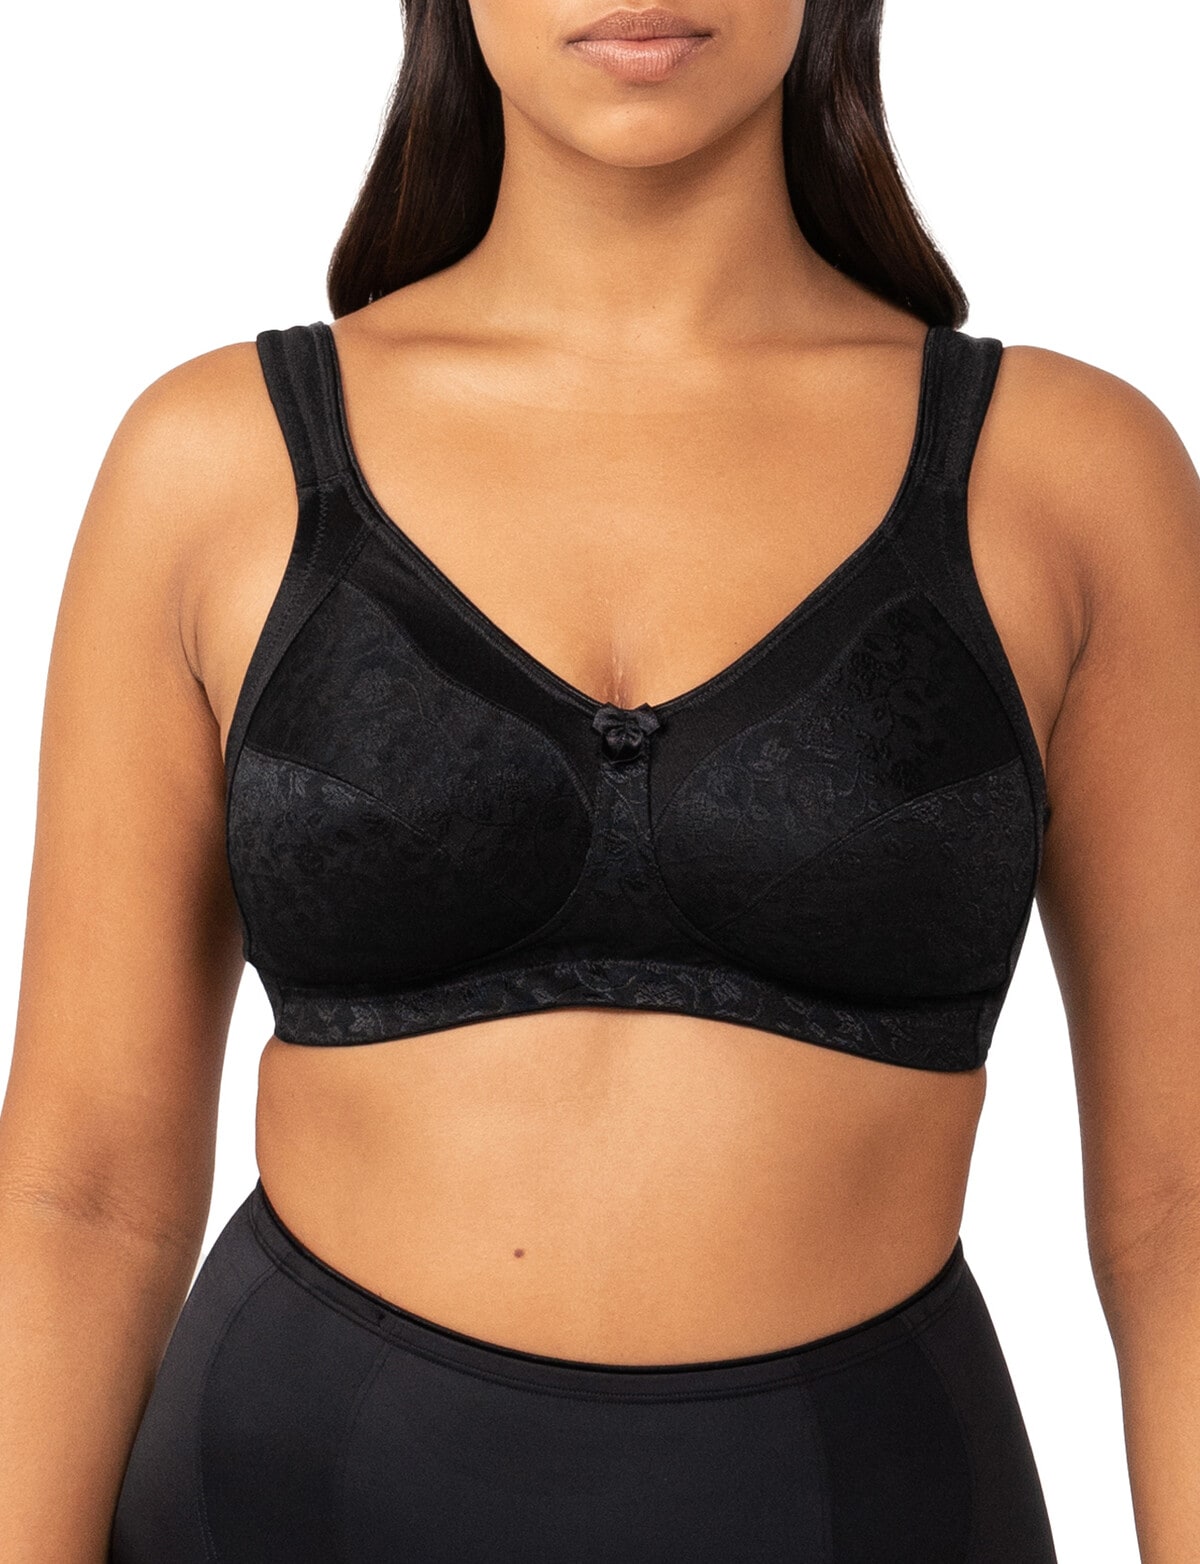 Breezies Wild Rose Support Wirefree Bra Black D/42 New